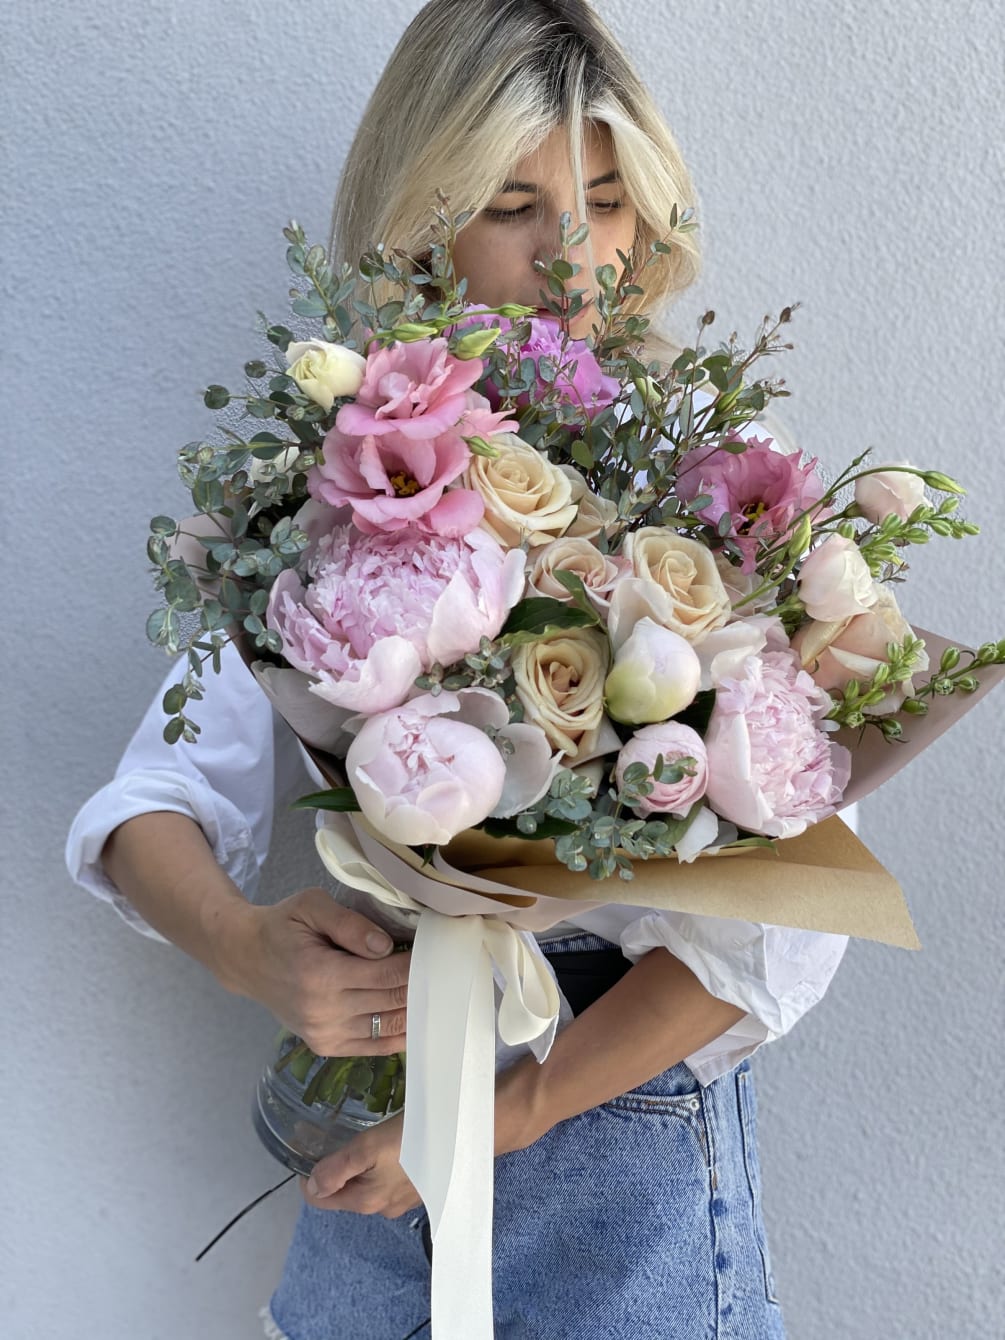 Very beautiful and tender bouquet of peonies with lisianthus ,greenery and most